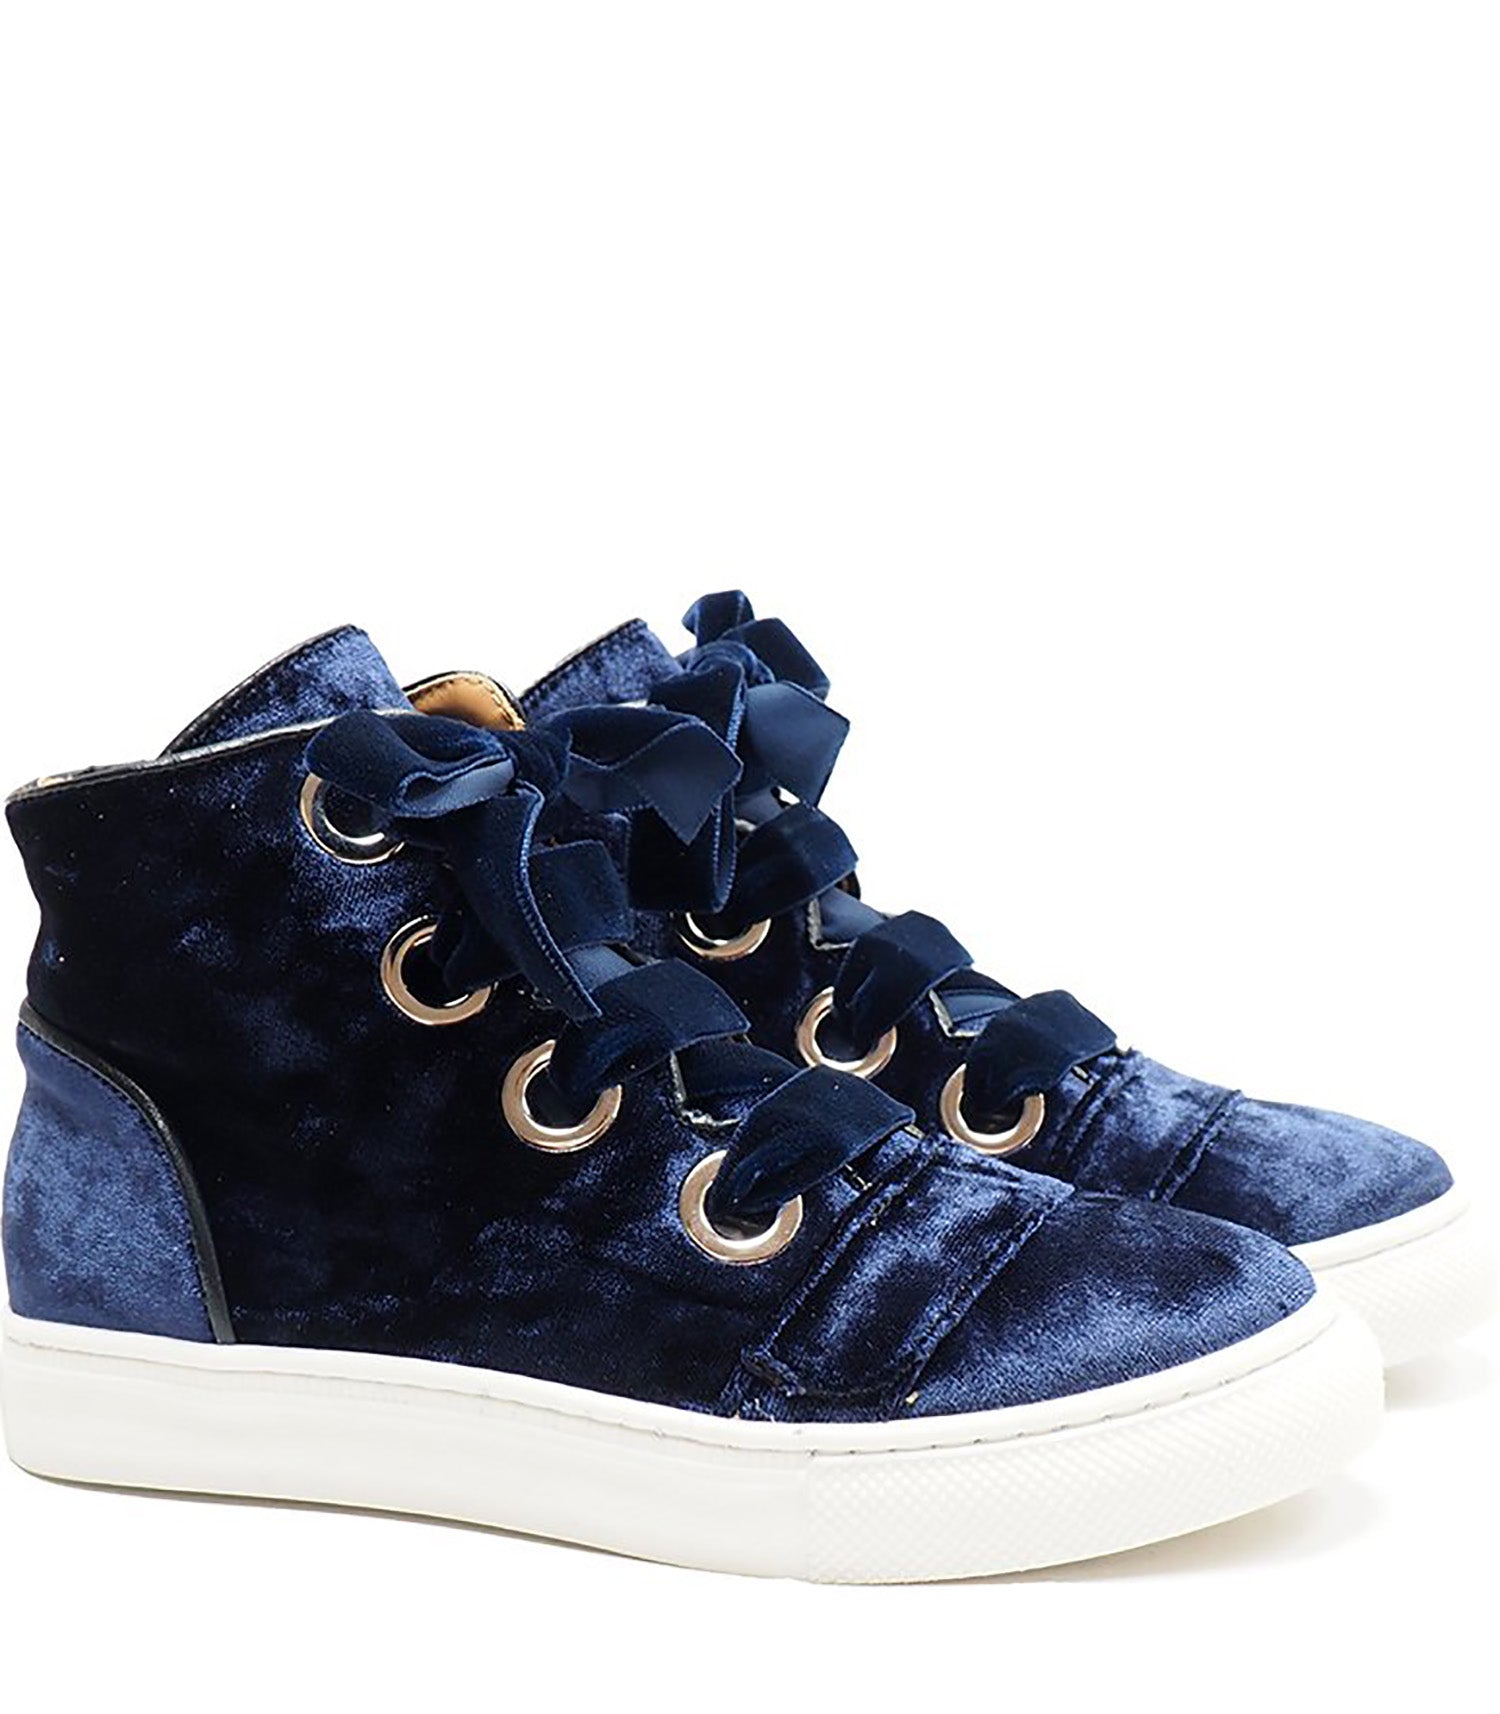 High-top sneakers in blue velvet with 